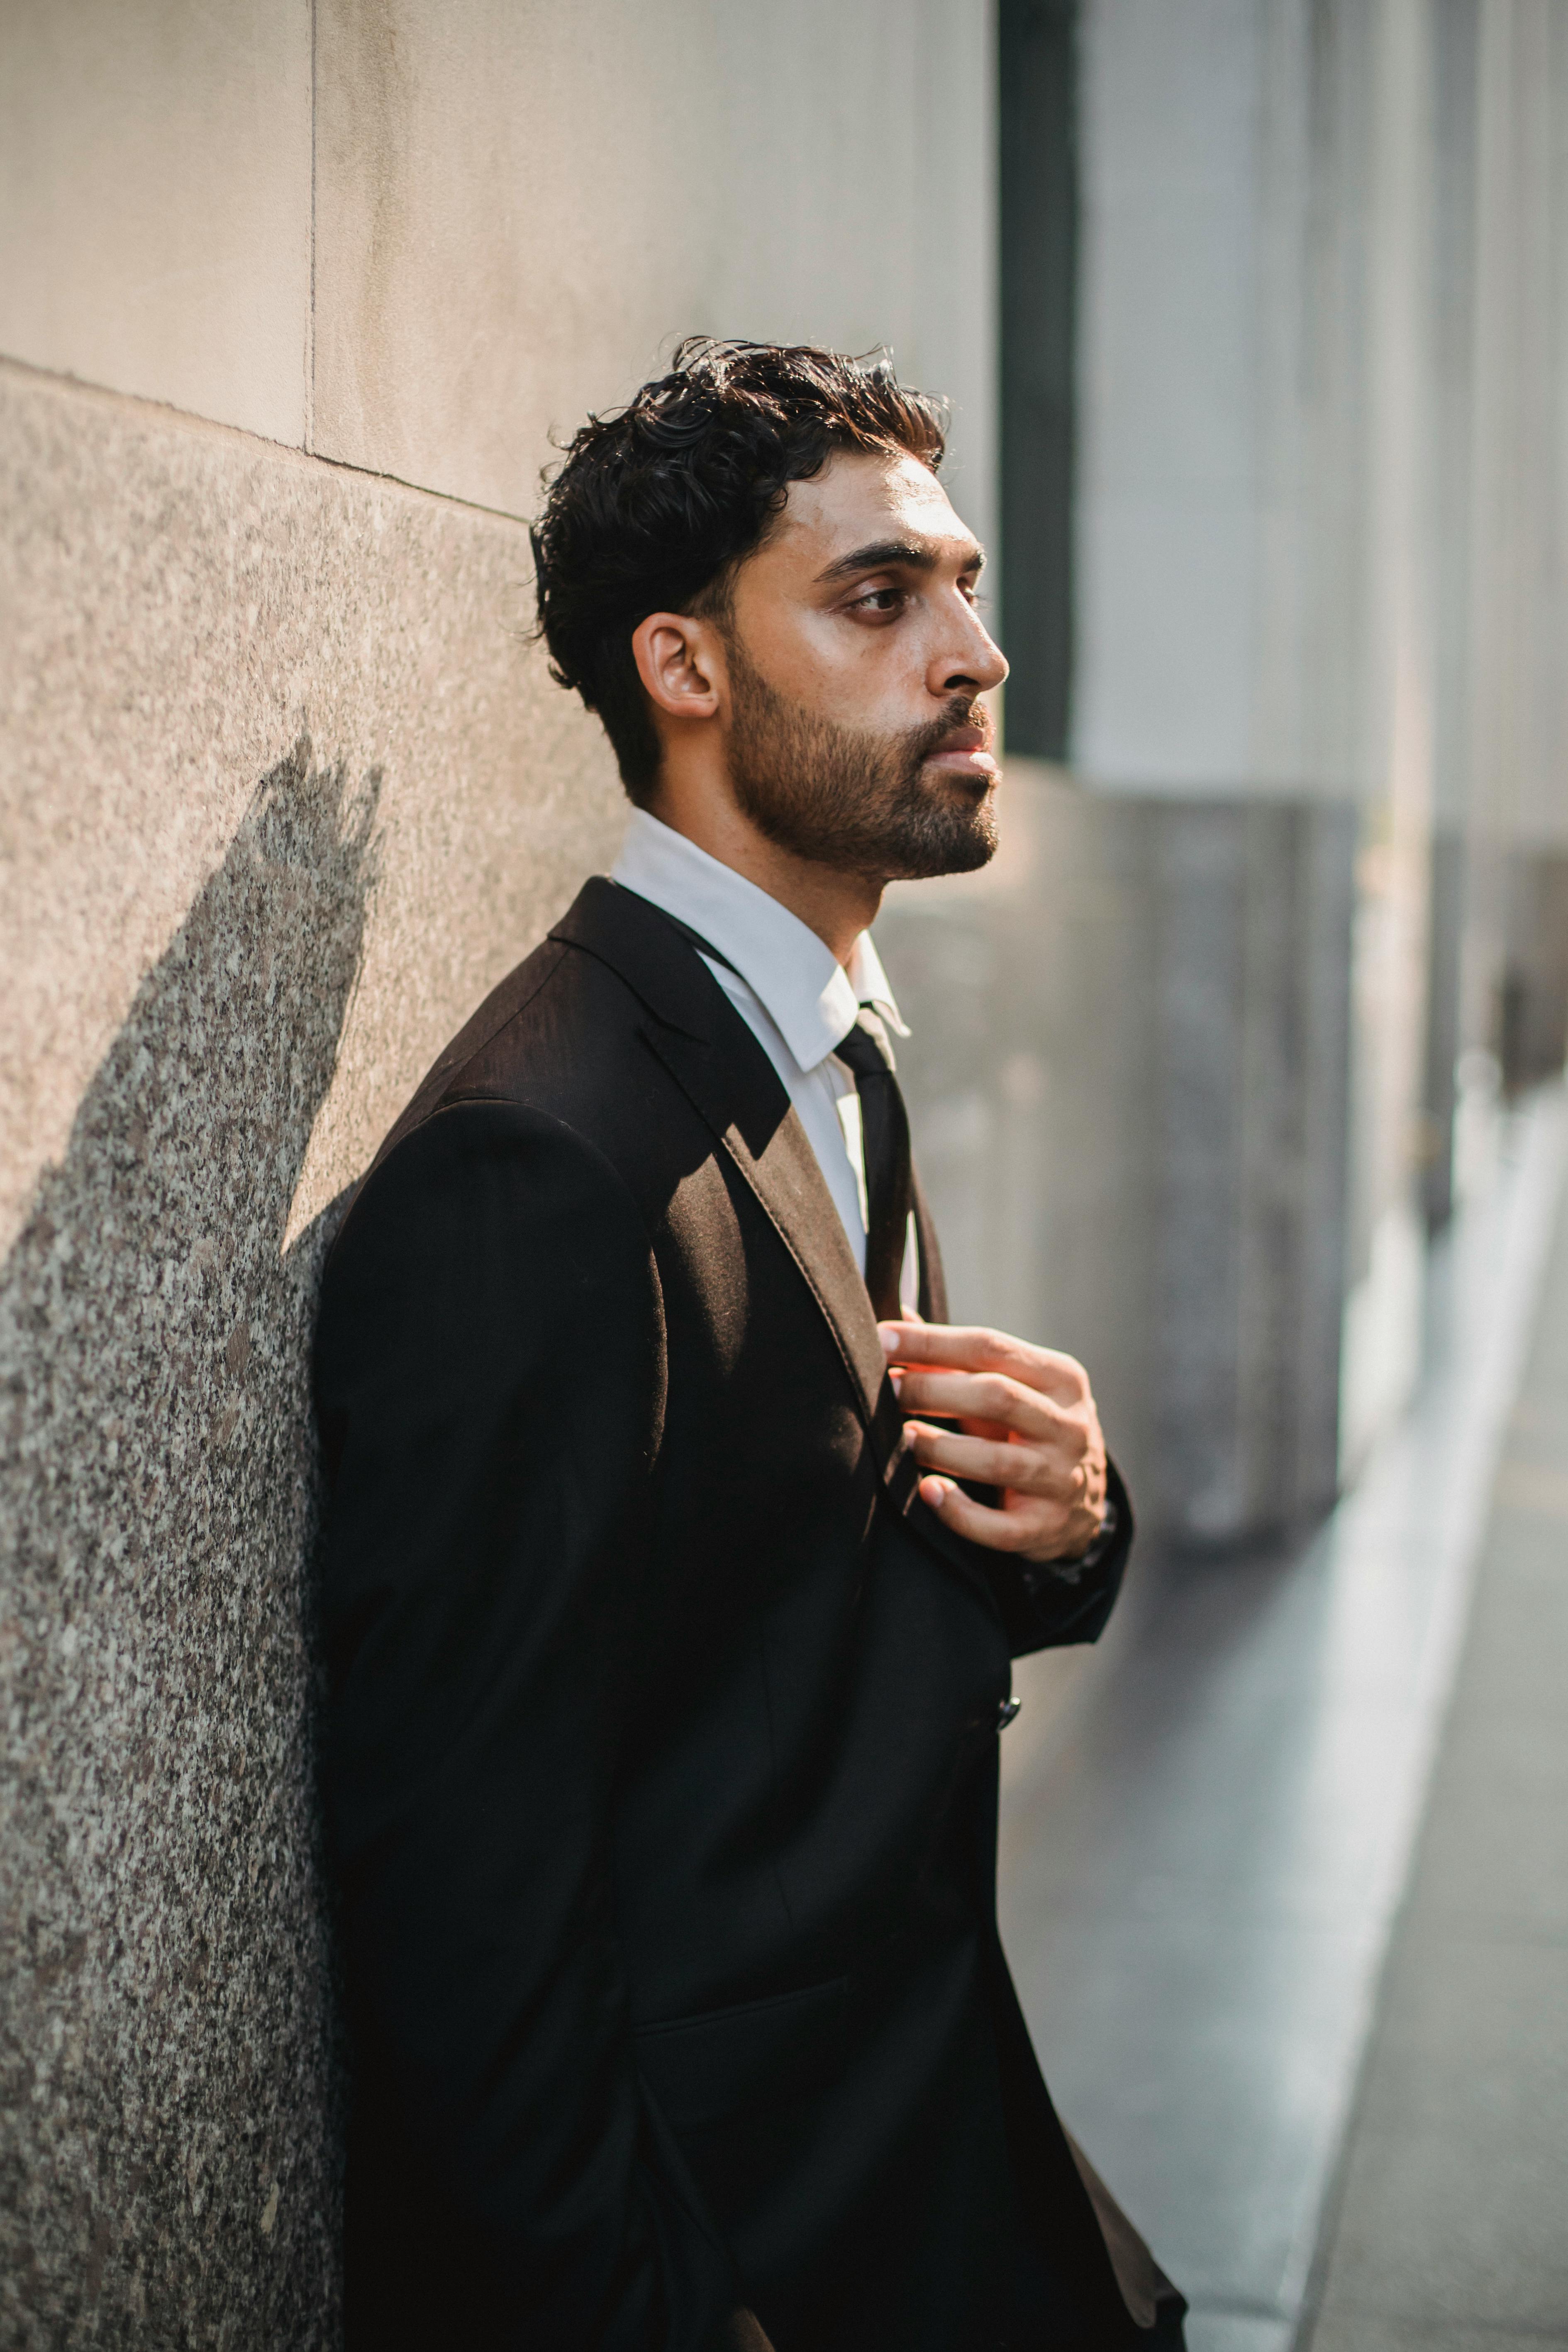 Stylish Man In Black Suit Posing With Free Stock Photo and Image 185160778